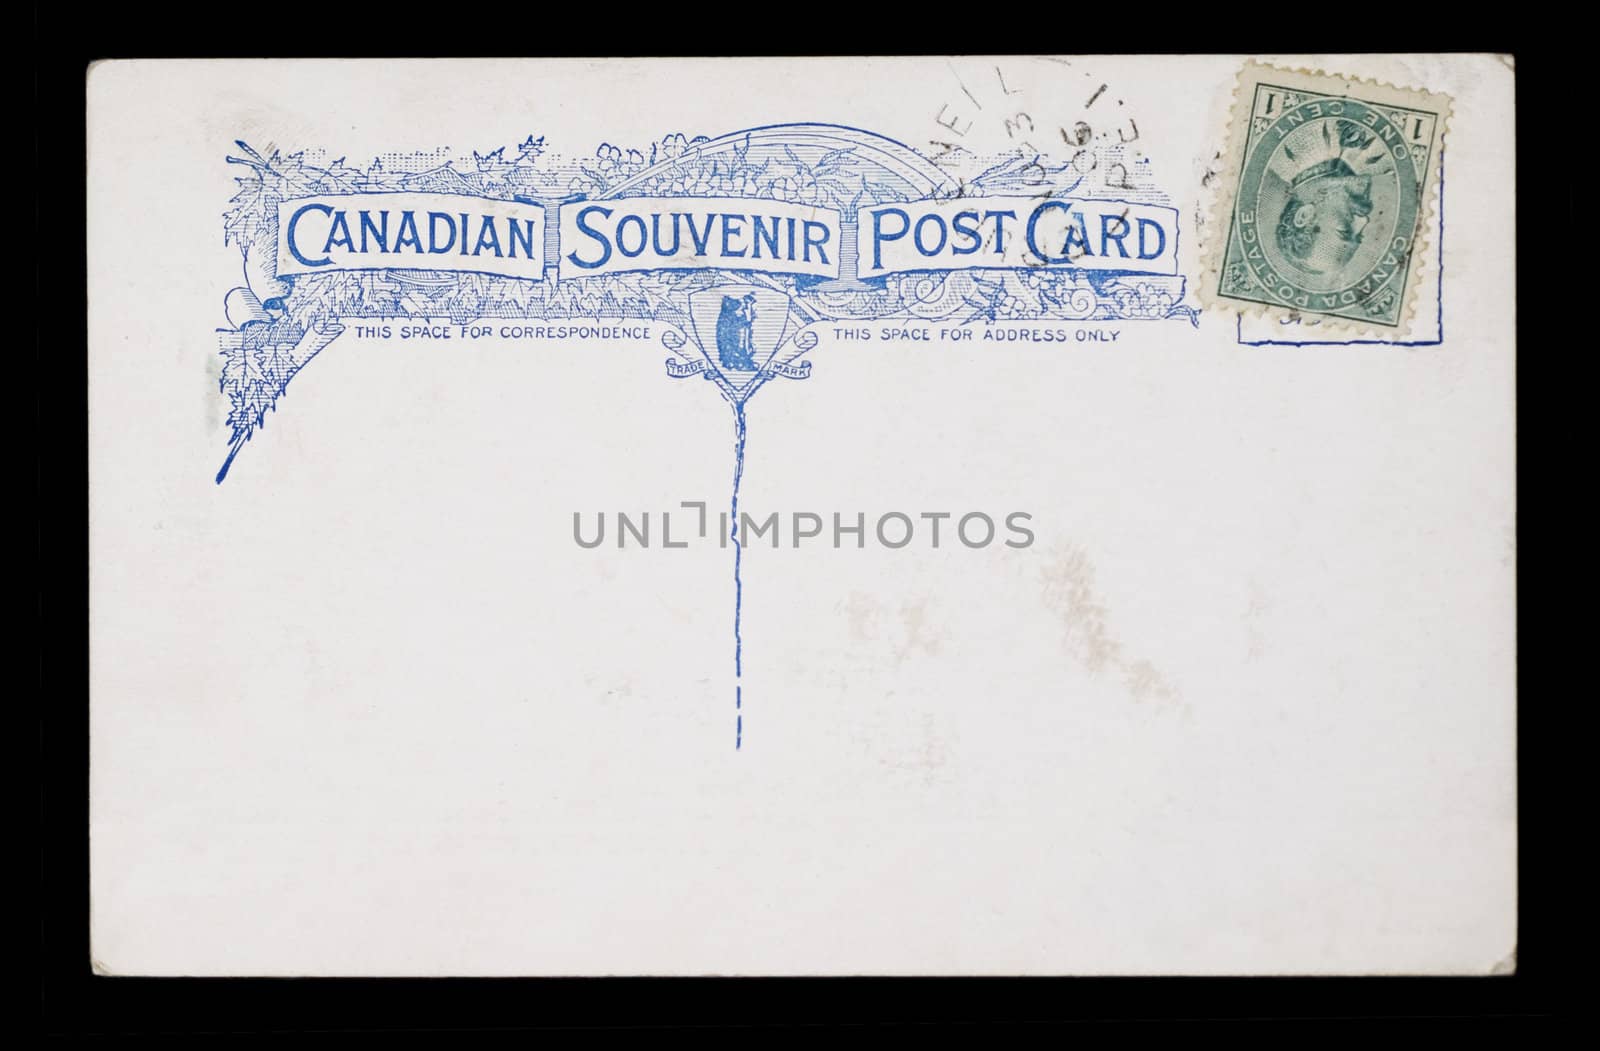 Antqiue Canadian Souvenir Post Card - blank except the cancelled stamp.